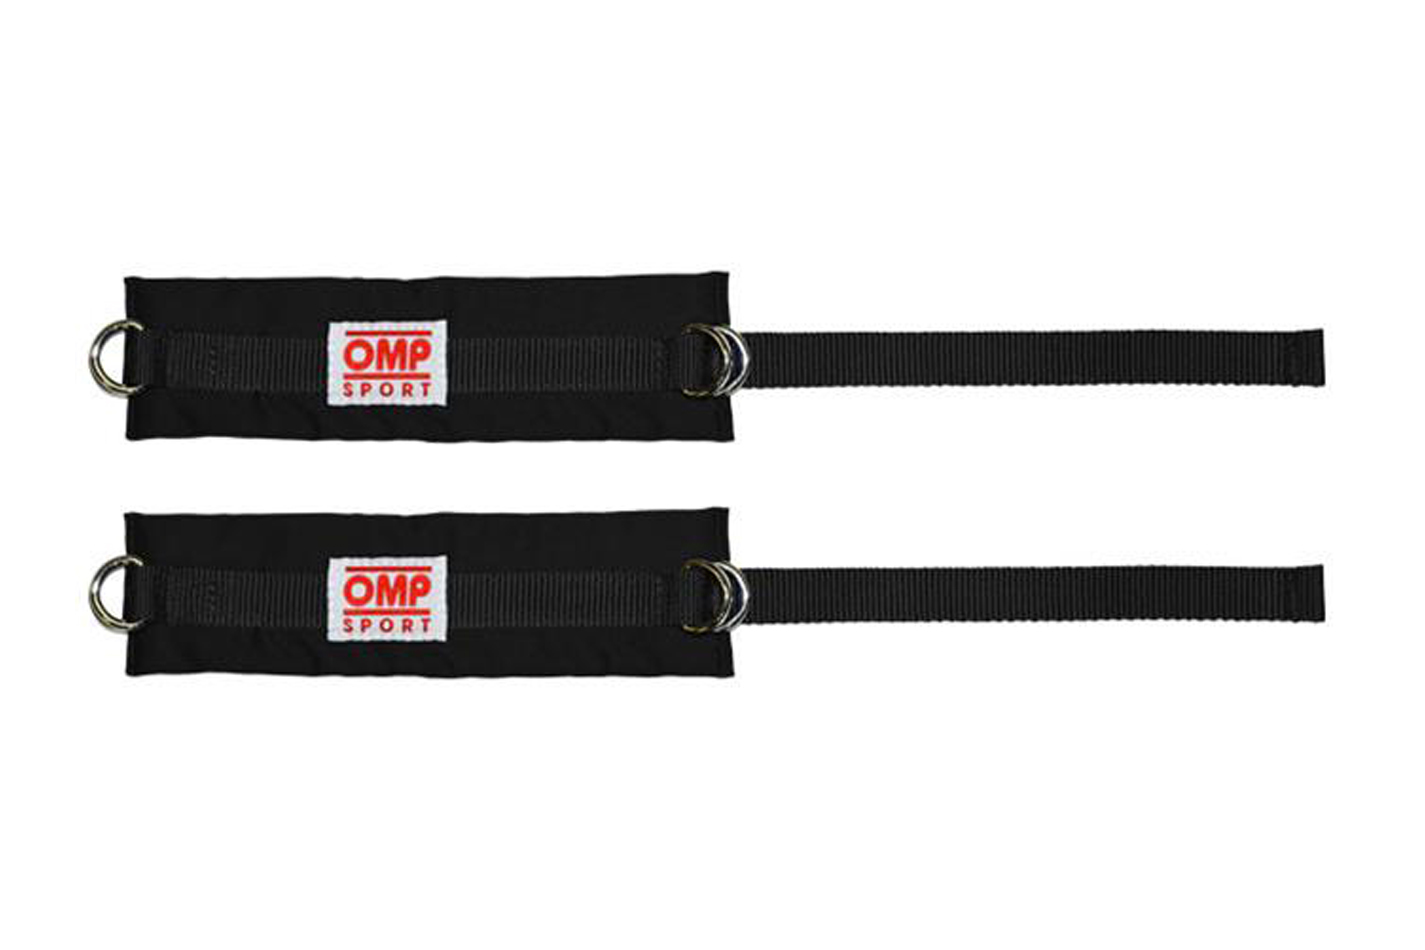 OMP Racing IA01843071 Arm Restraint Harness, FIA Approved, Individual Straps, Padded Arm Bands, Nylon, Black, Adult, Each